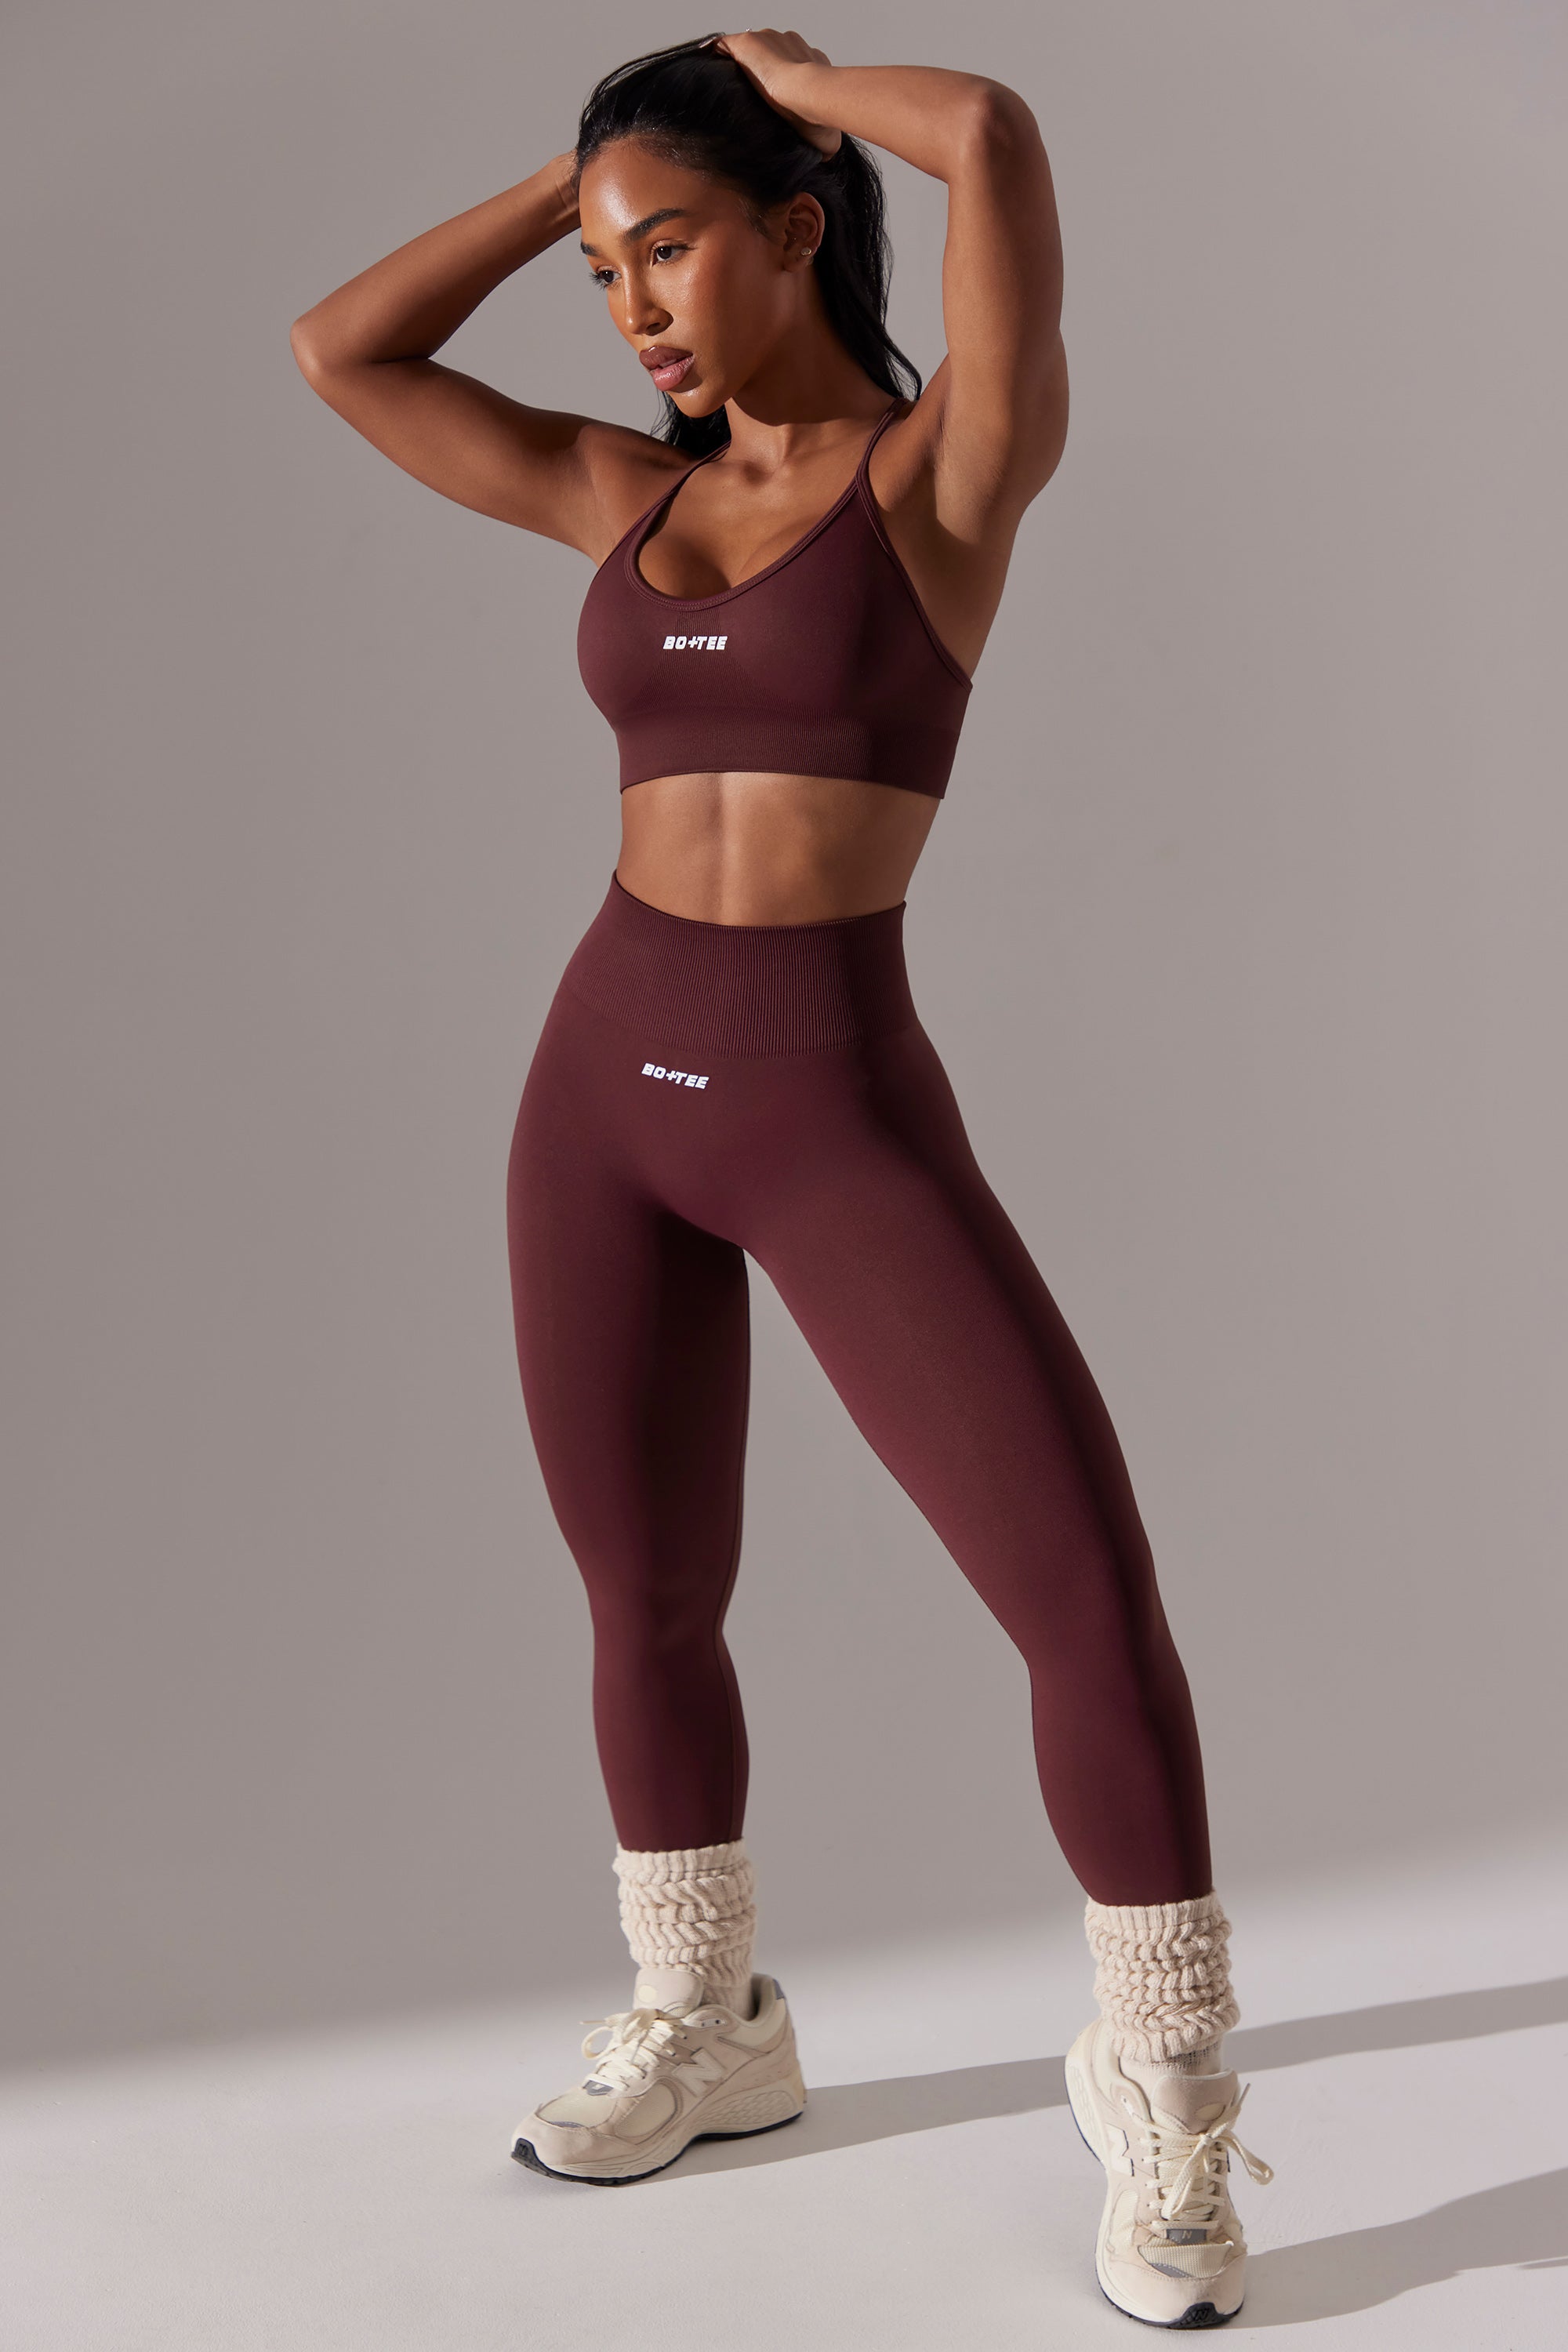 Burgundy sports bra (up to size 20) (matching leggings available